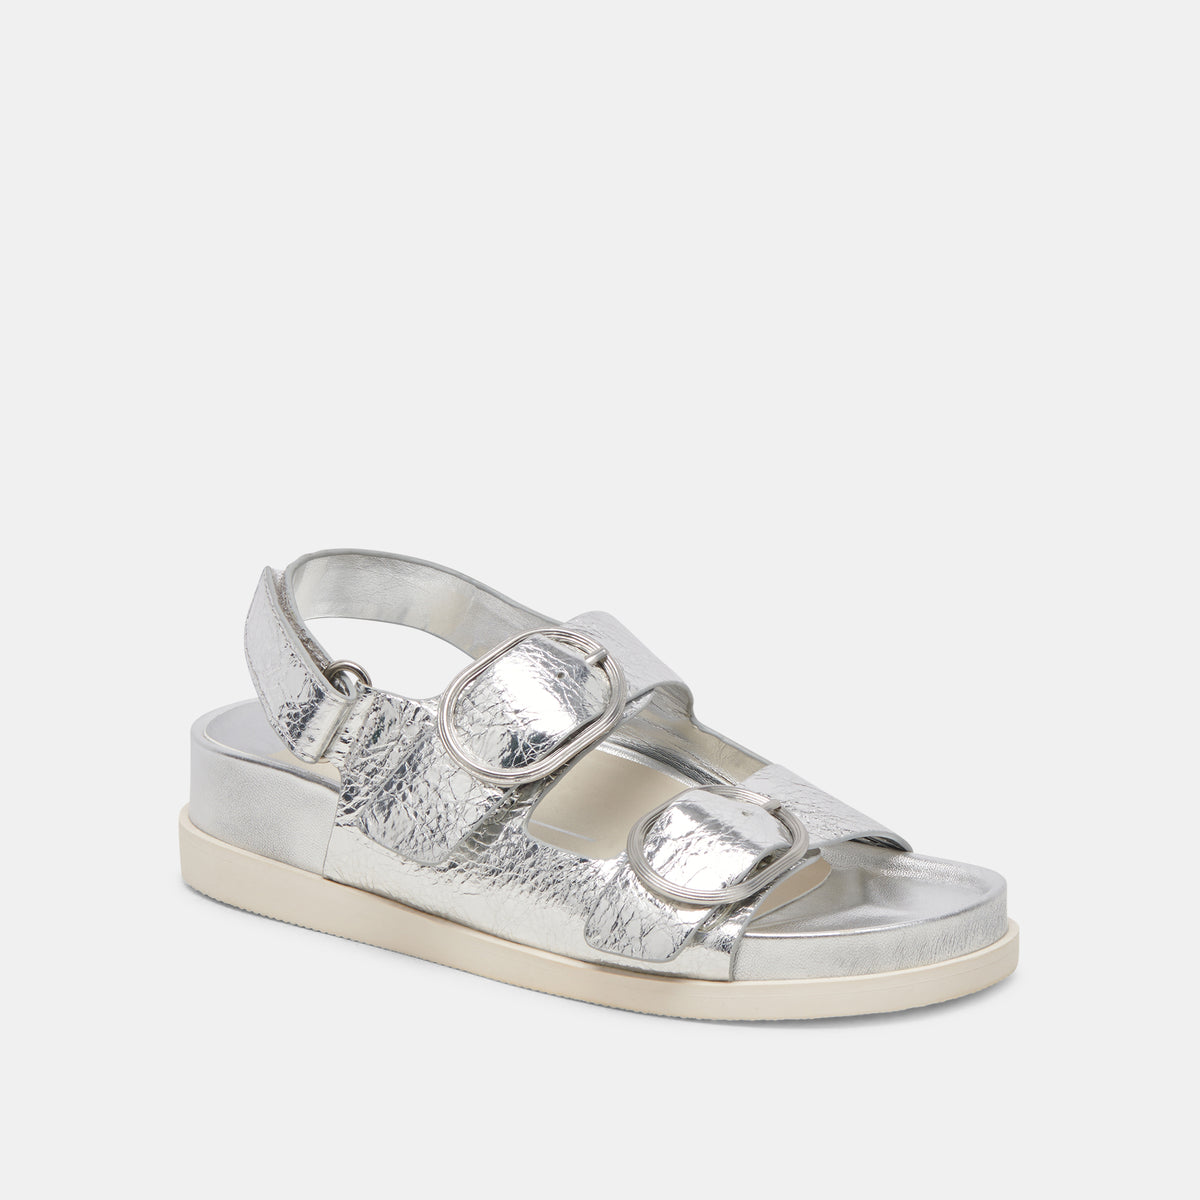 Starla Sandals Silver Distressed Leather | Silver Leather Sandals ...